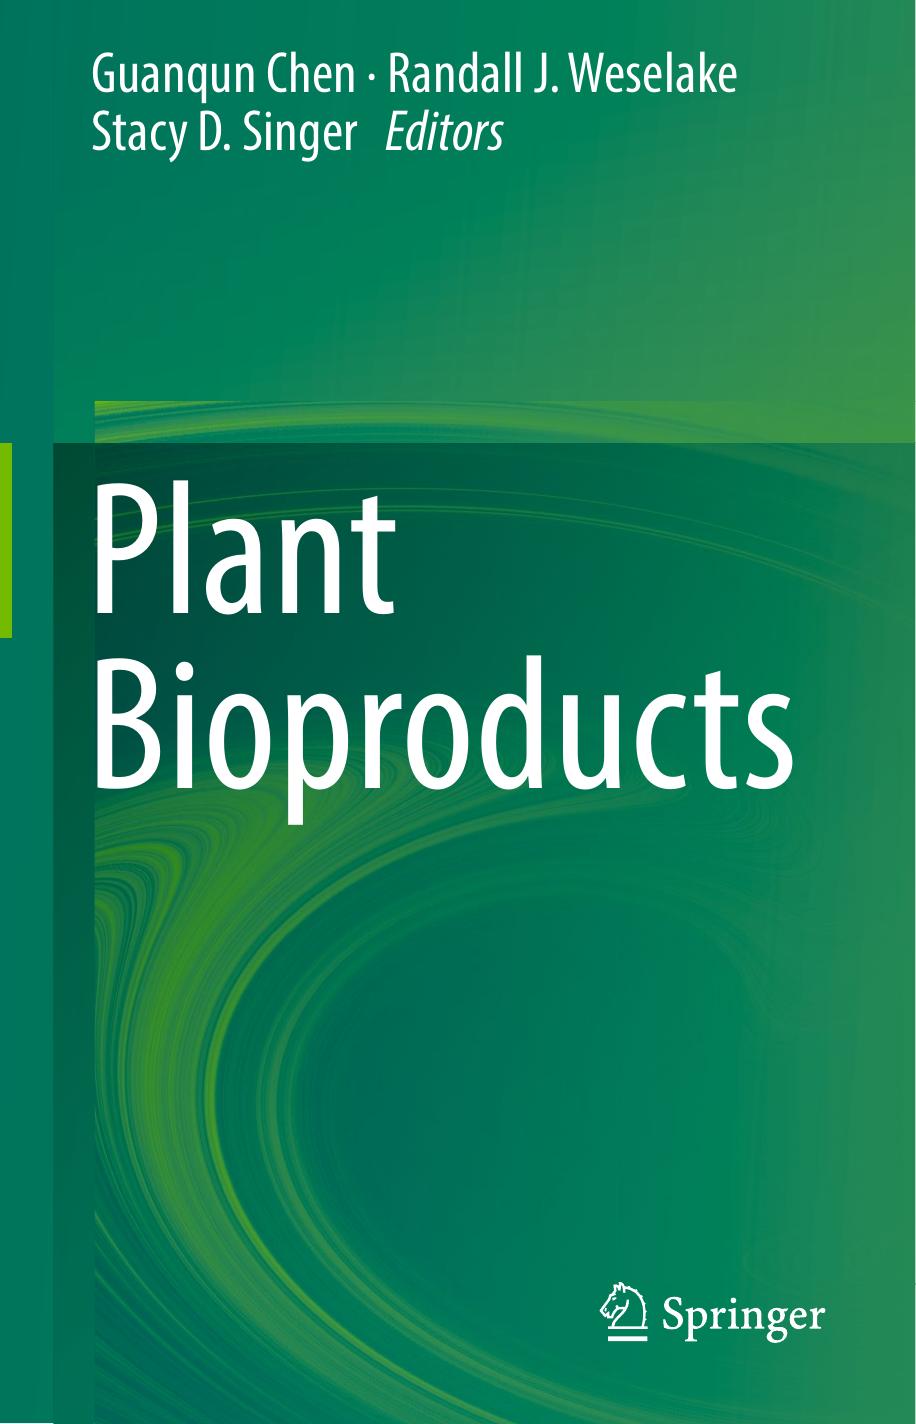 Plant Bioproducts 2018